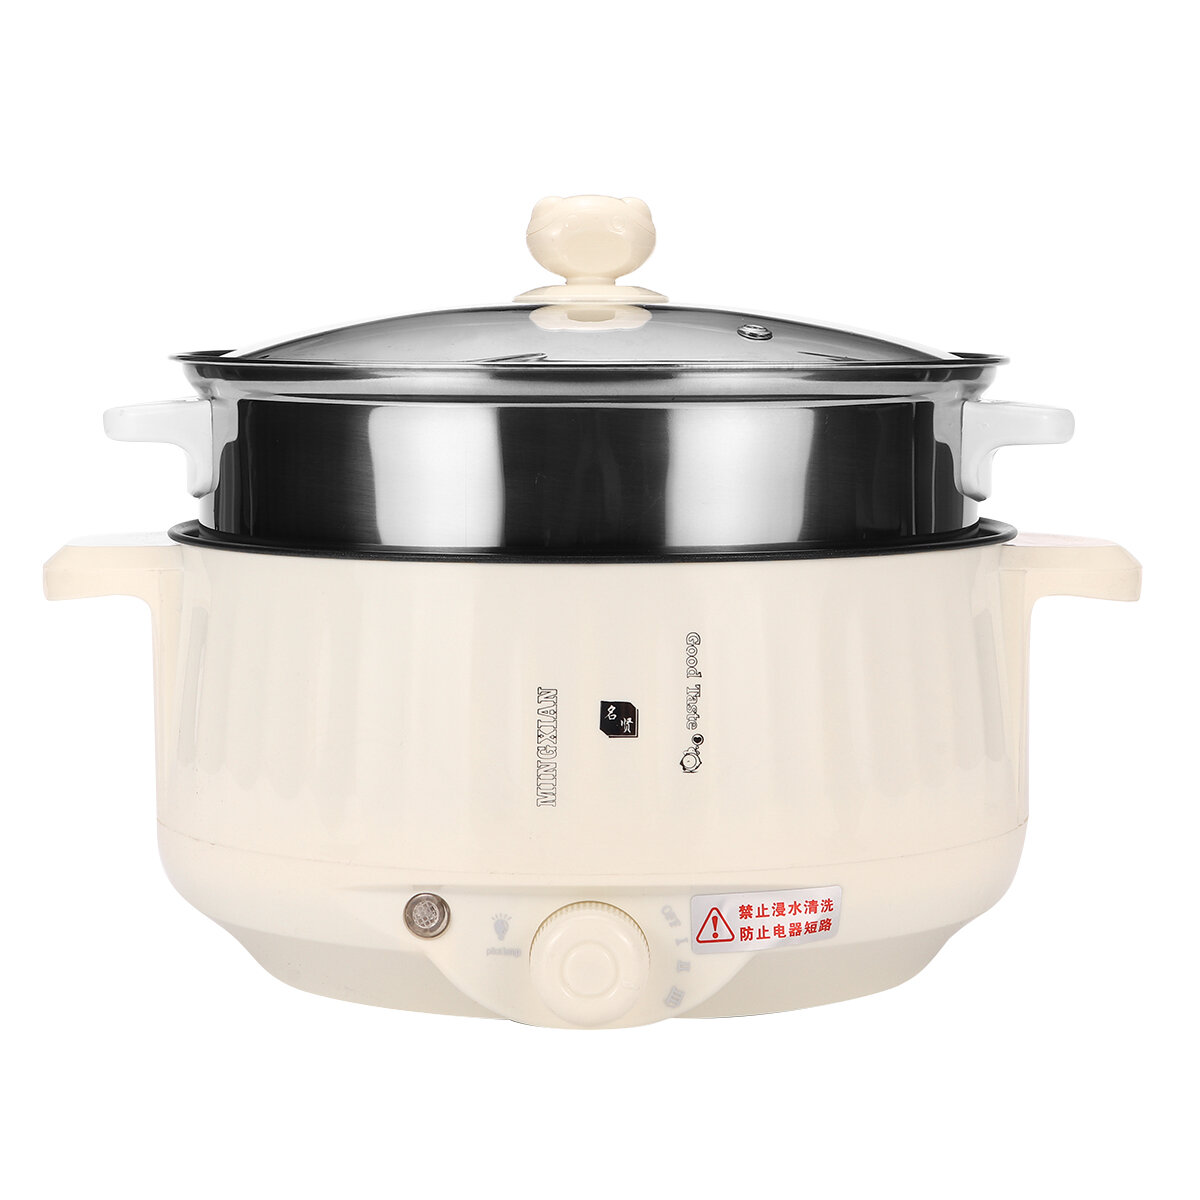 Image of 220V Mini Electric Cooking Pot Multifunction Rice Cooker Hot Pot Noodles Egg Soup Steamer Non-stick Linner Electric Cook